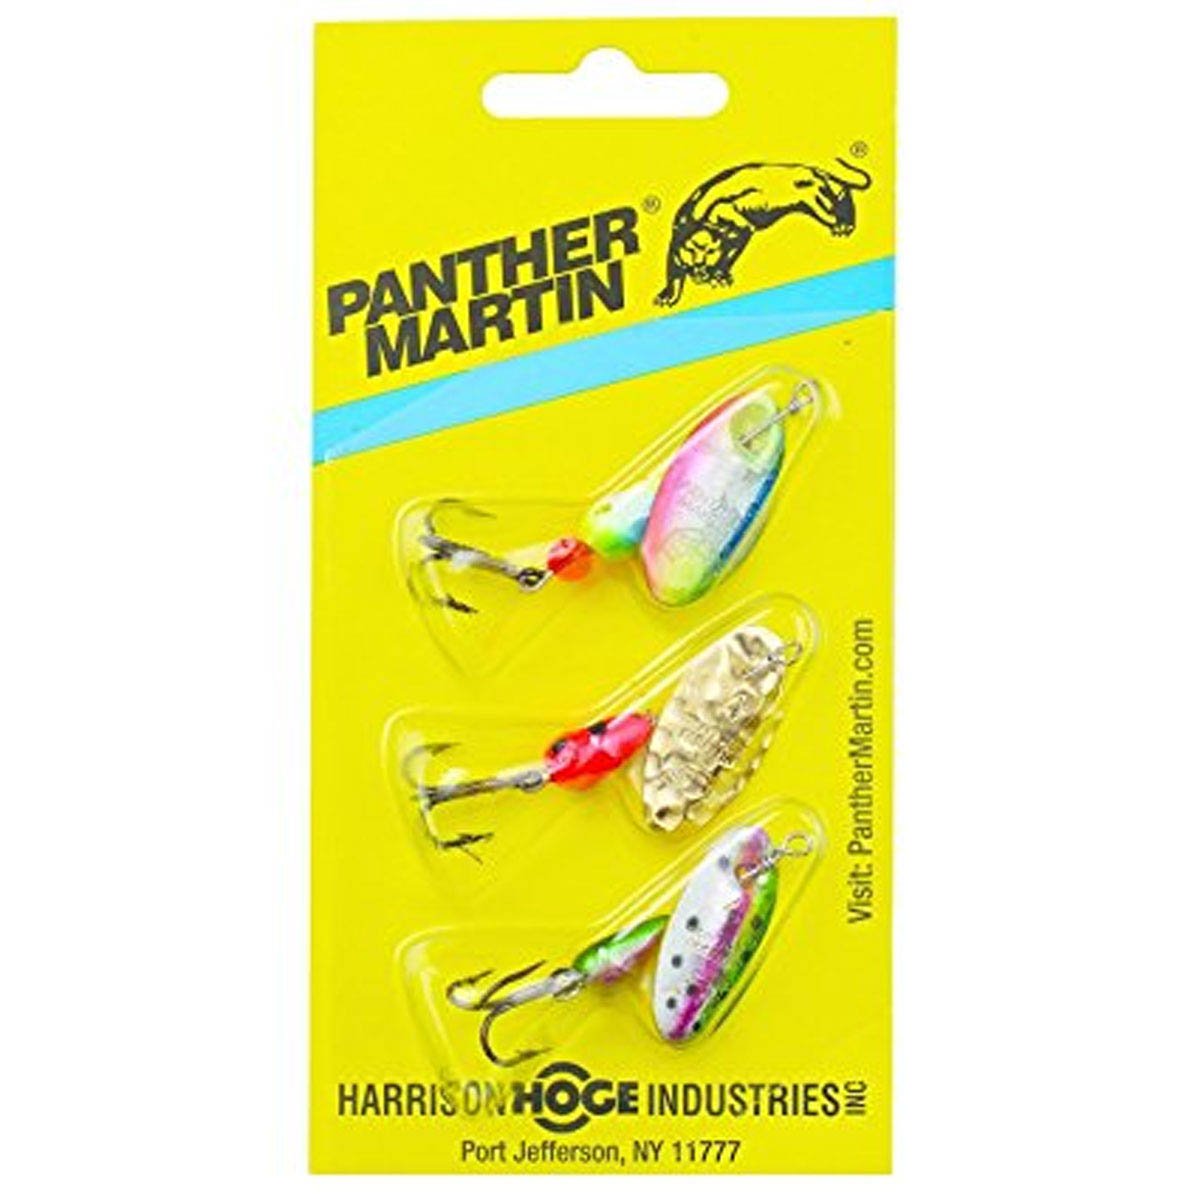 Panther Martin OD3 Opening Day 3 Hammered Holographic Spinner Kit